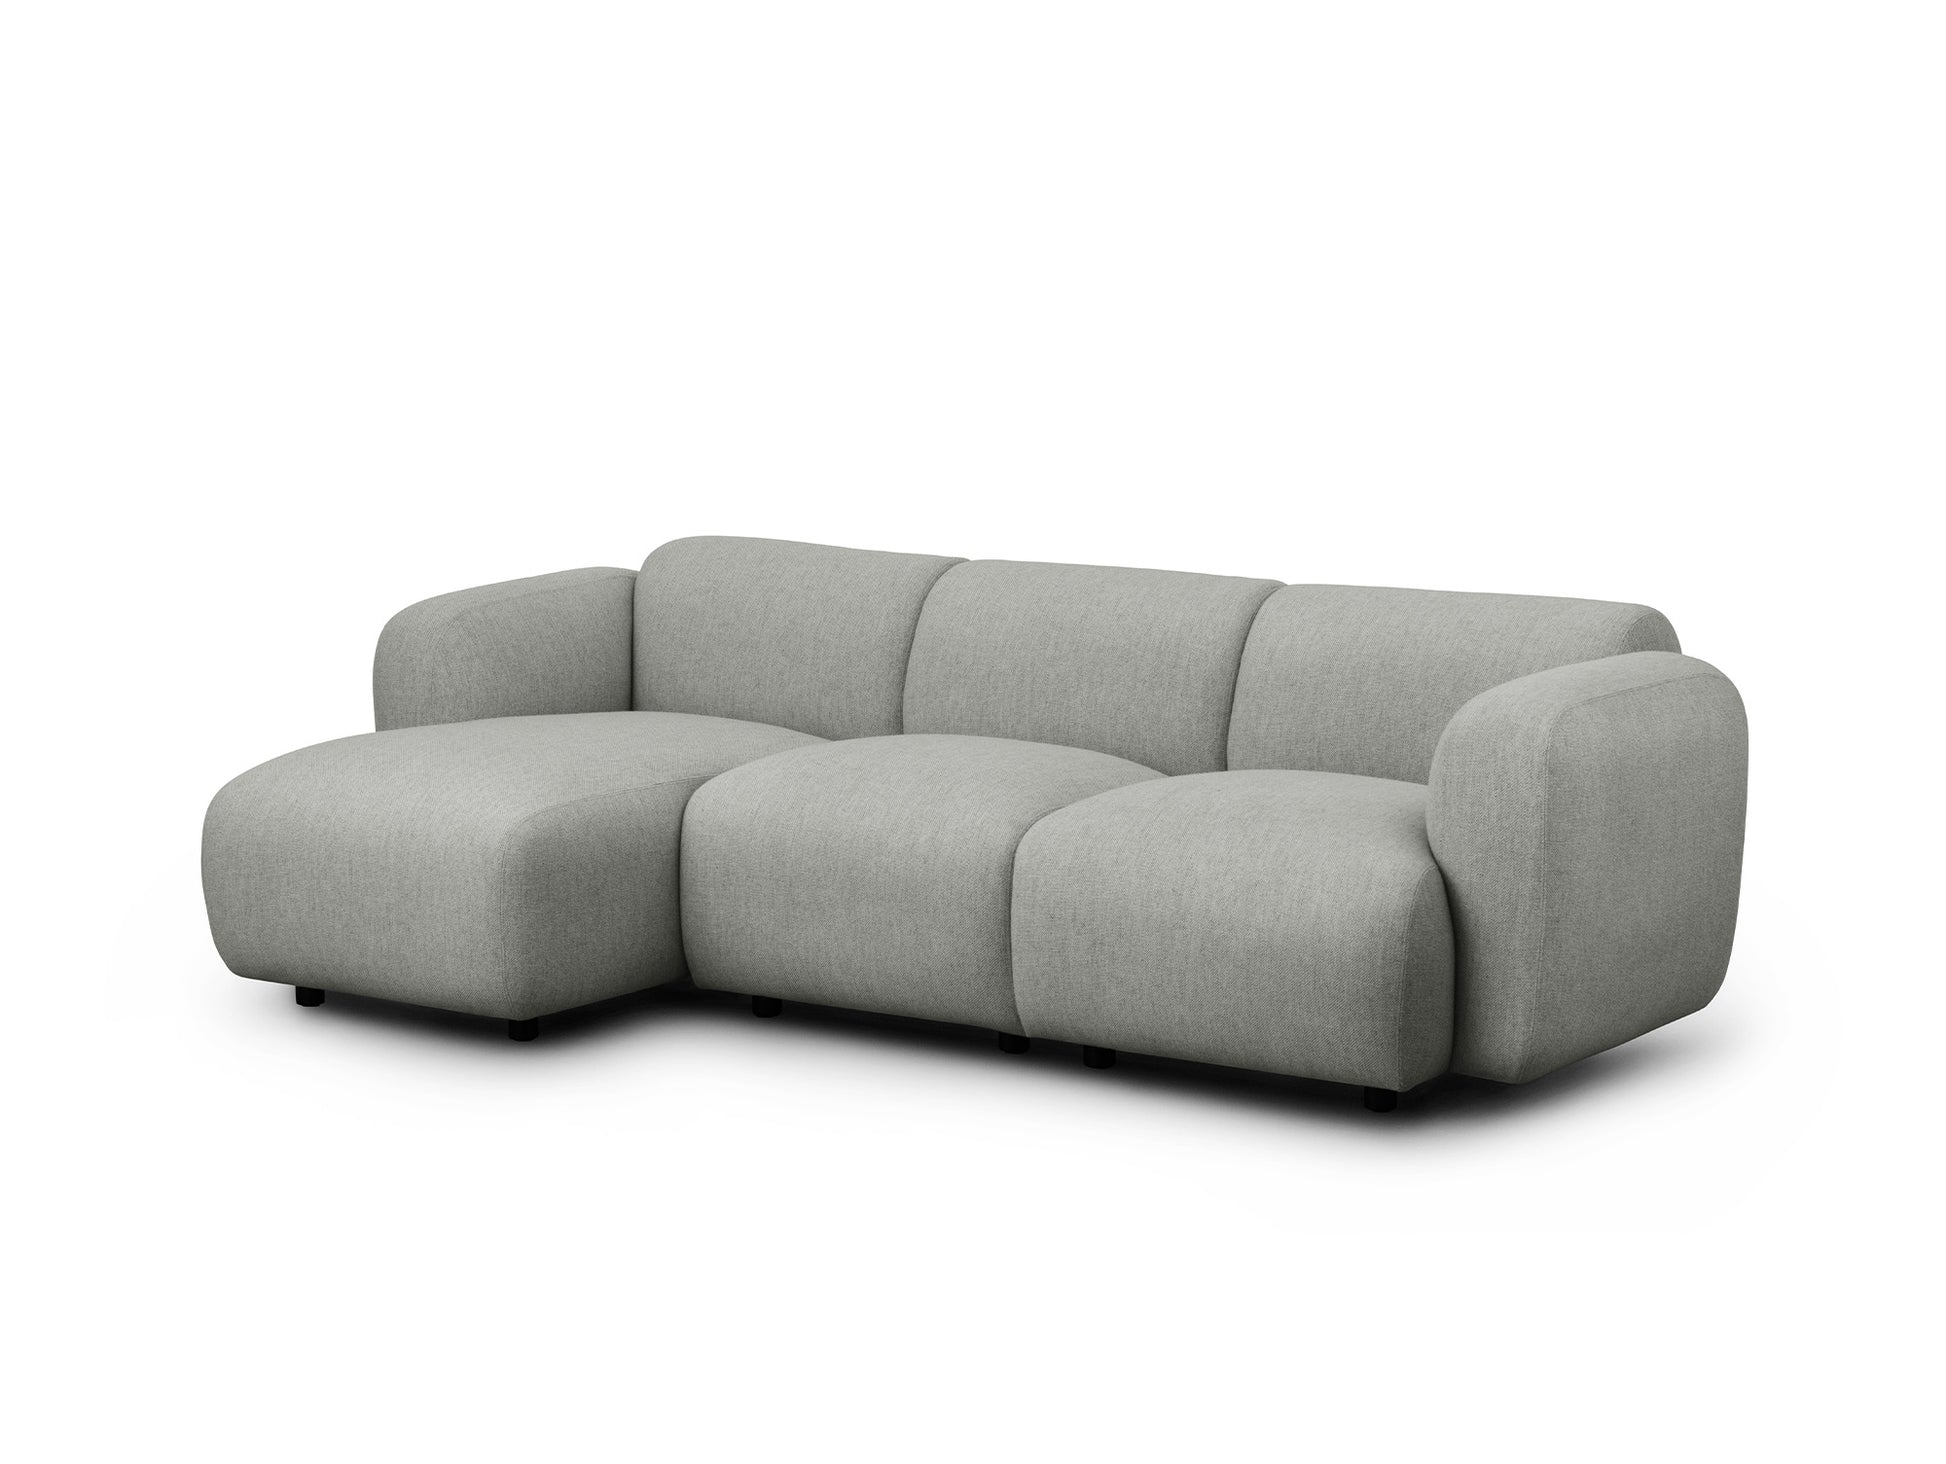 Swell 3-Seater with Chaise Longue - Left Armrest Sofa by Normann Copenhagen / Hallingdal 65 110